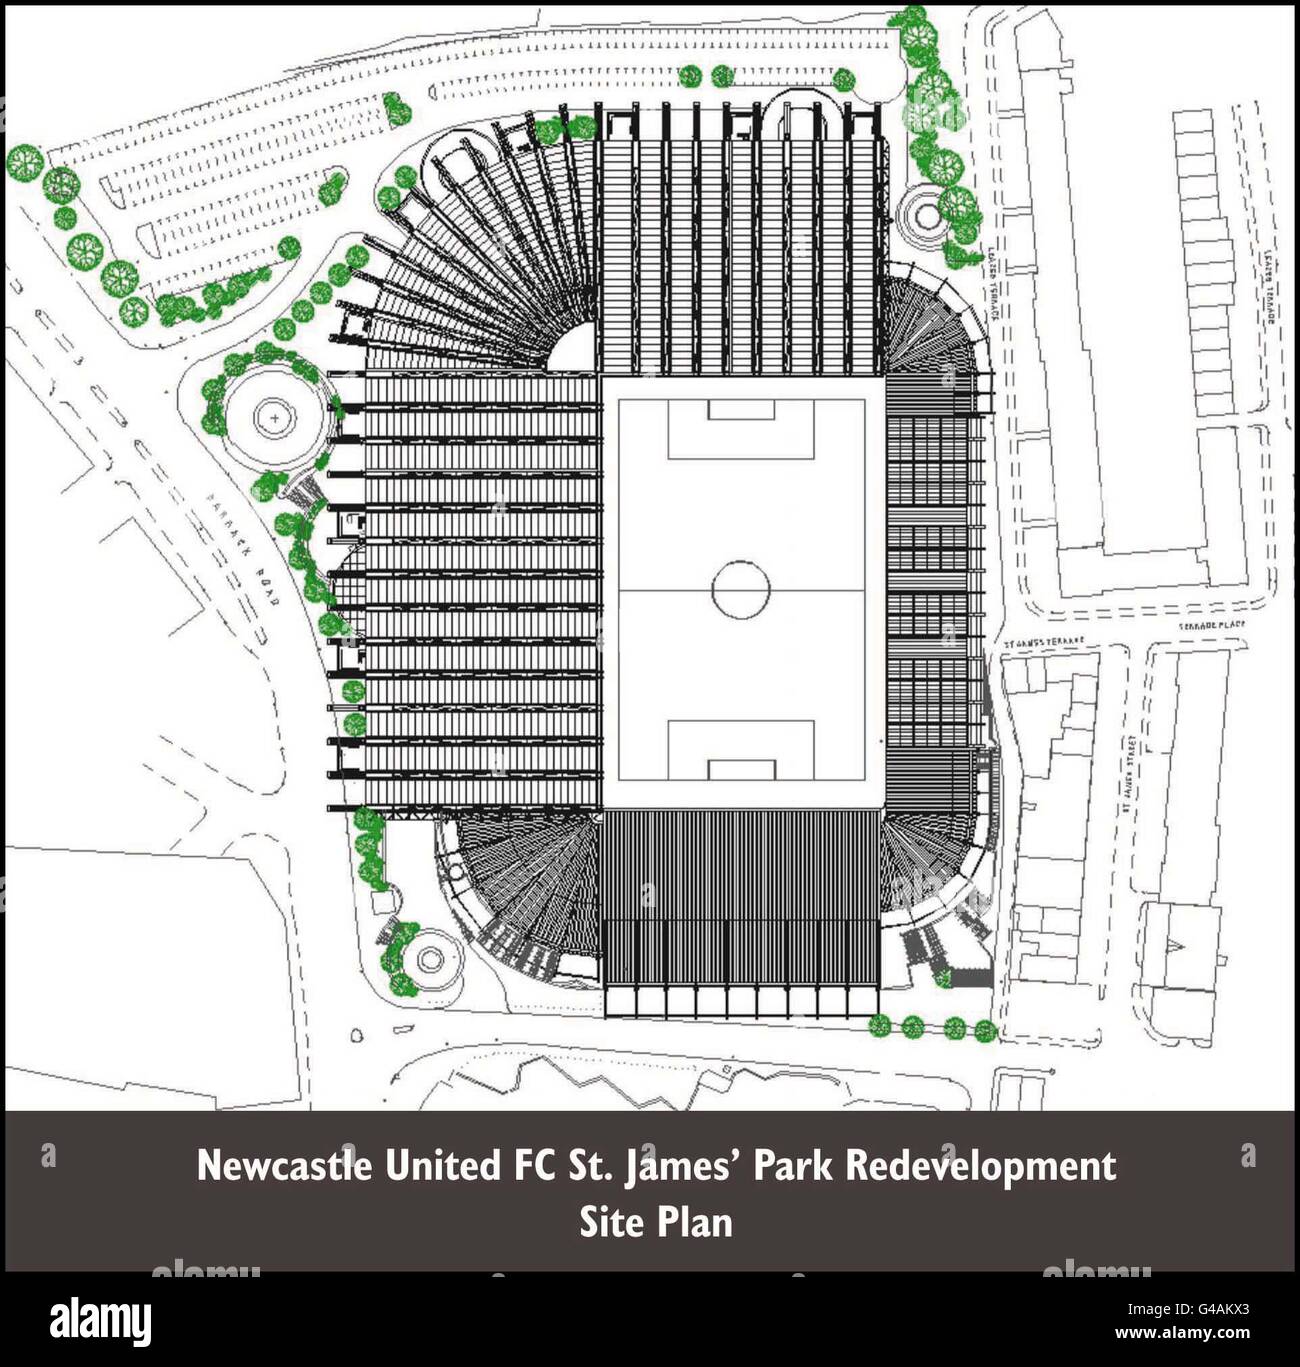 The site plan of Newcastle United FC's planed expansion to St James' Park stadium. The 42 million expansion will see the ground's capacity increase from 36,800 to 51,000. It is hoped that building work, which will extend the existing Milburn Stand, North West Corner and Sir John Hall Stand, will be finished by the 2000/01 football season. Stock Photo